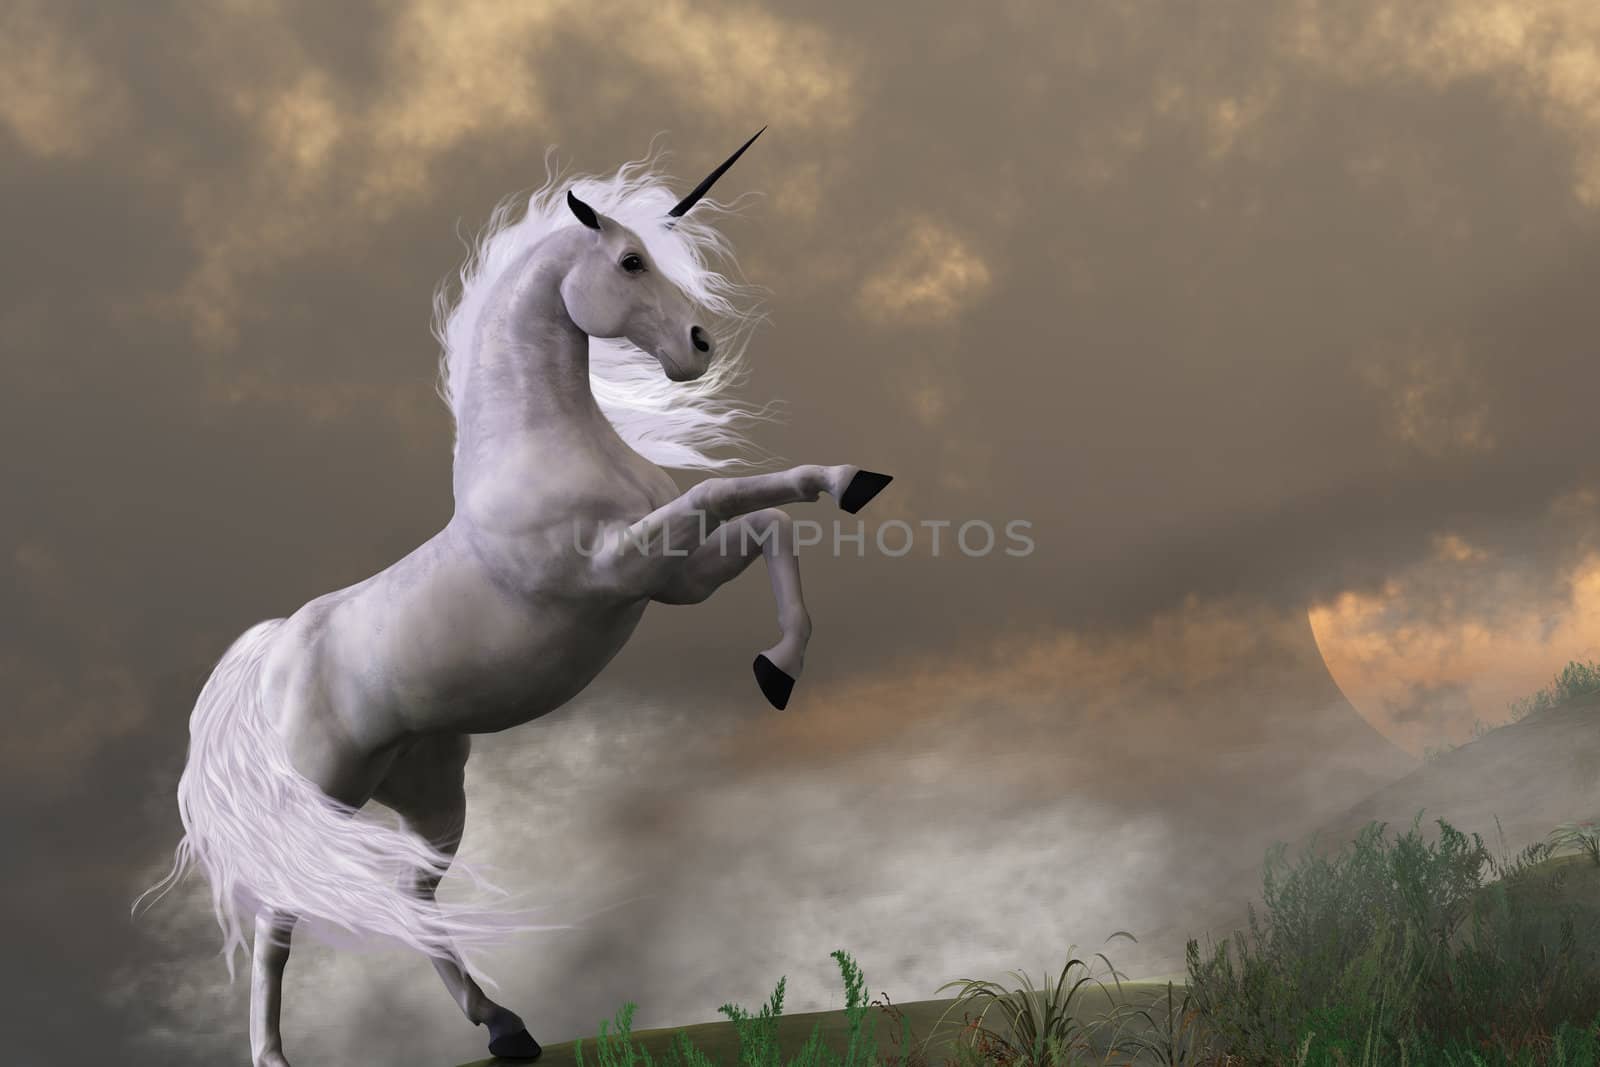 A unicorn stag asserts its power on a hill shrouded in clouds.